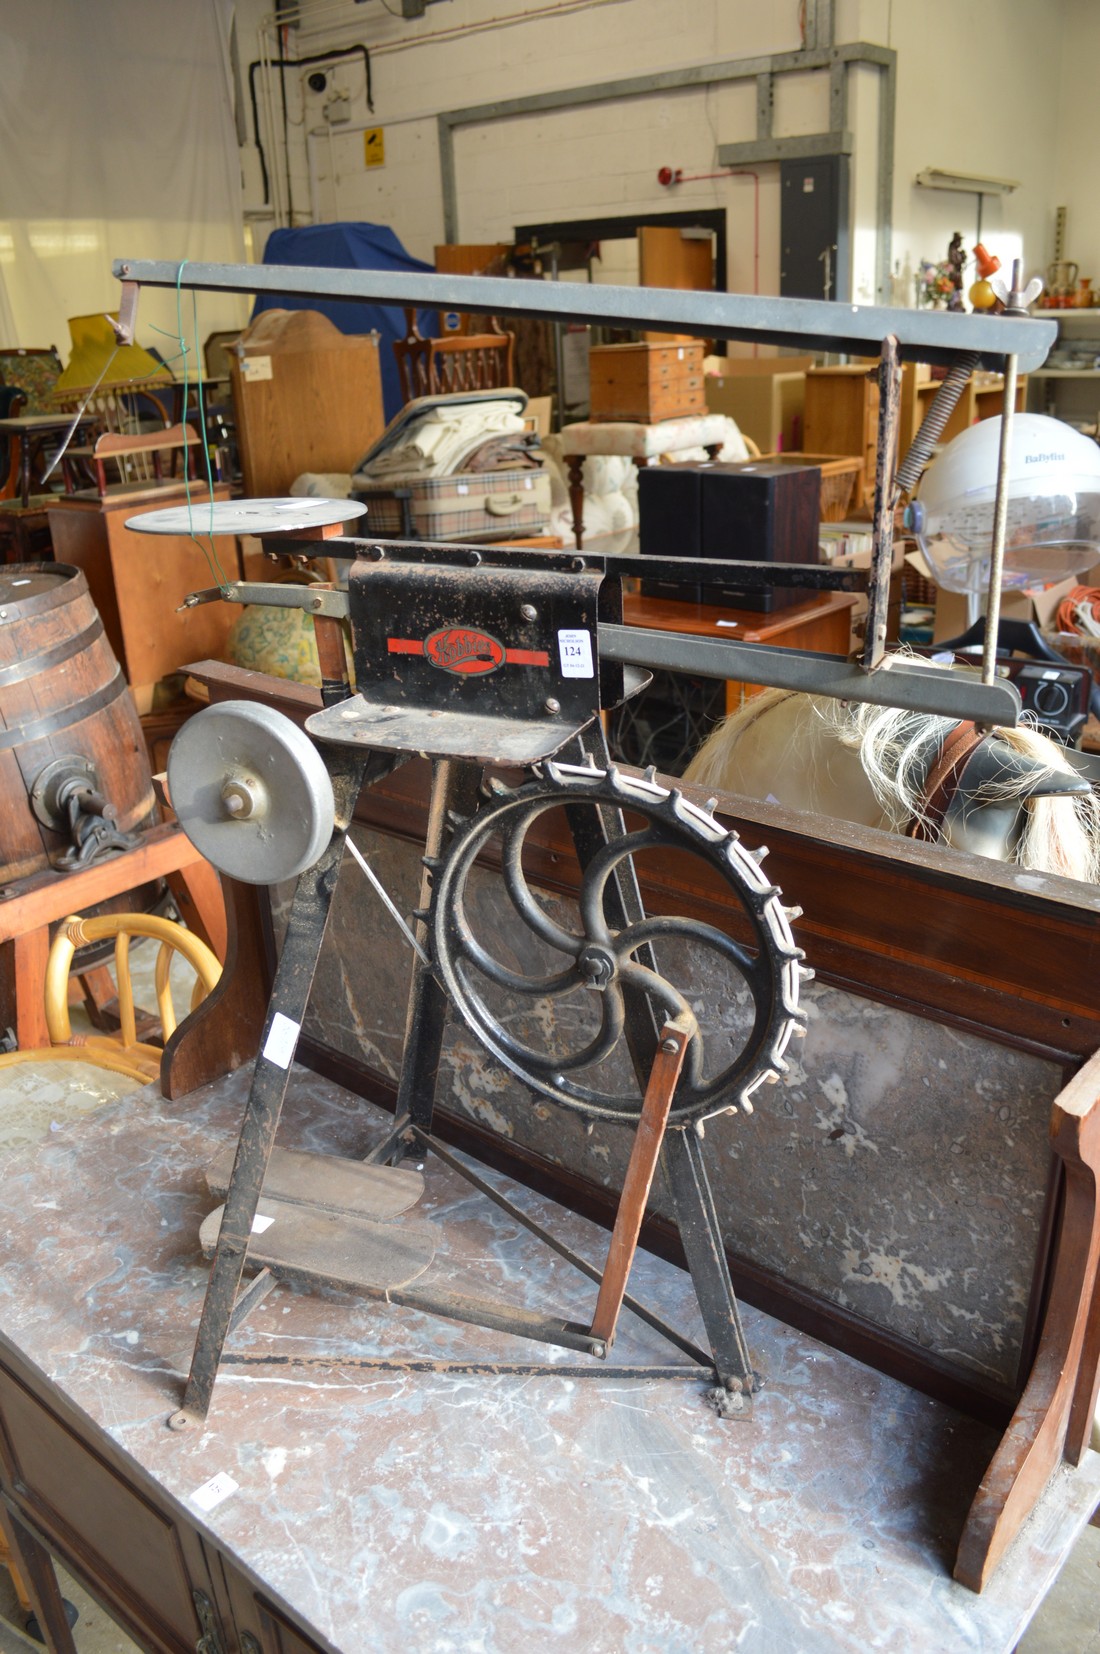 A Hobbies' treadle operated fret saw.